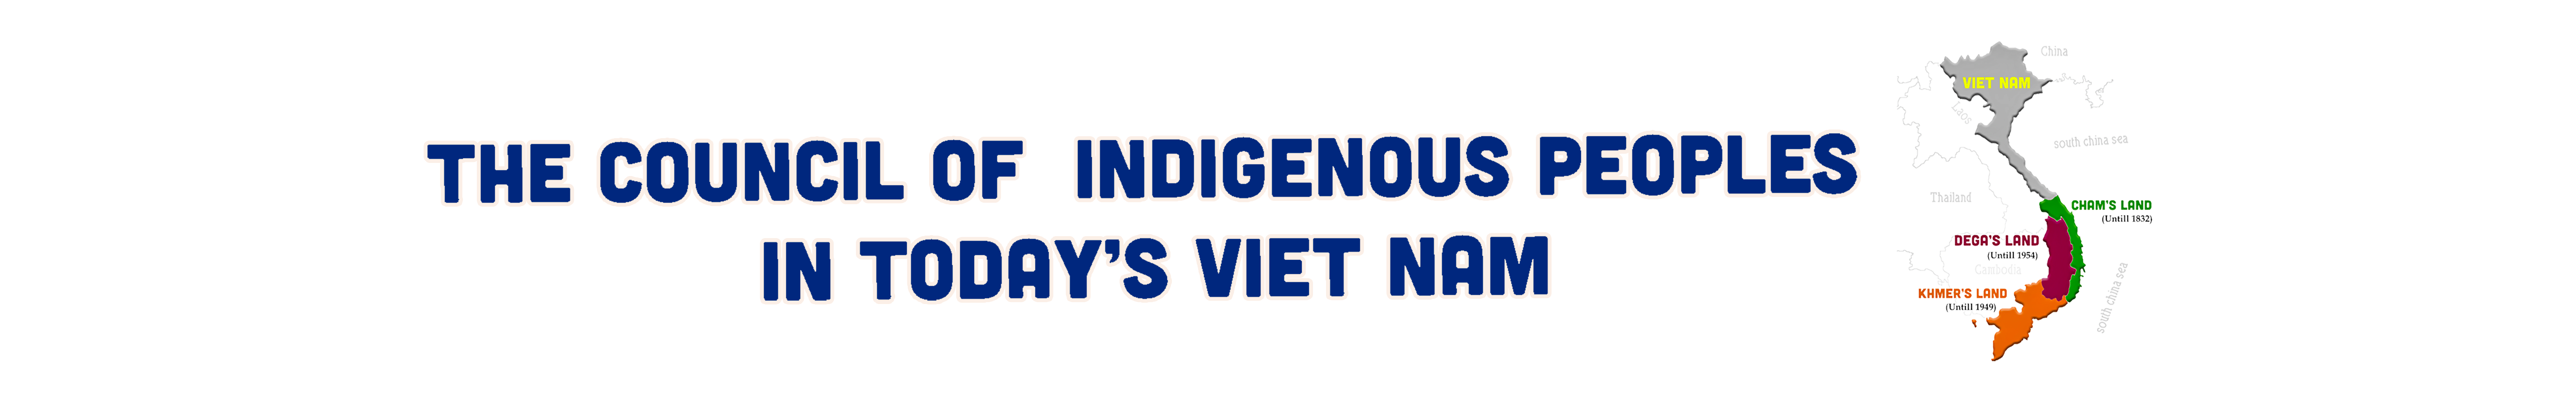 Council of Indigenous Peoples in Today’s Viet Nam